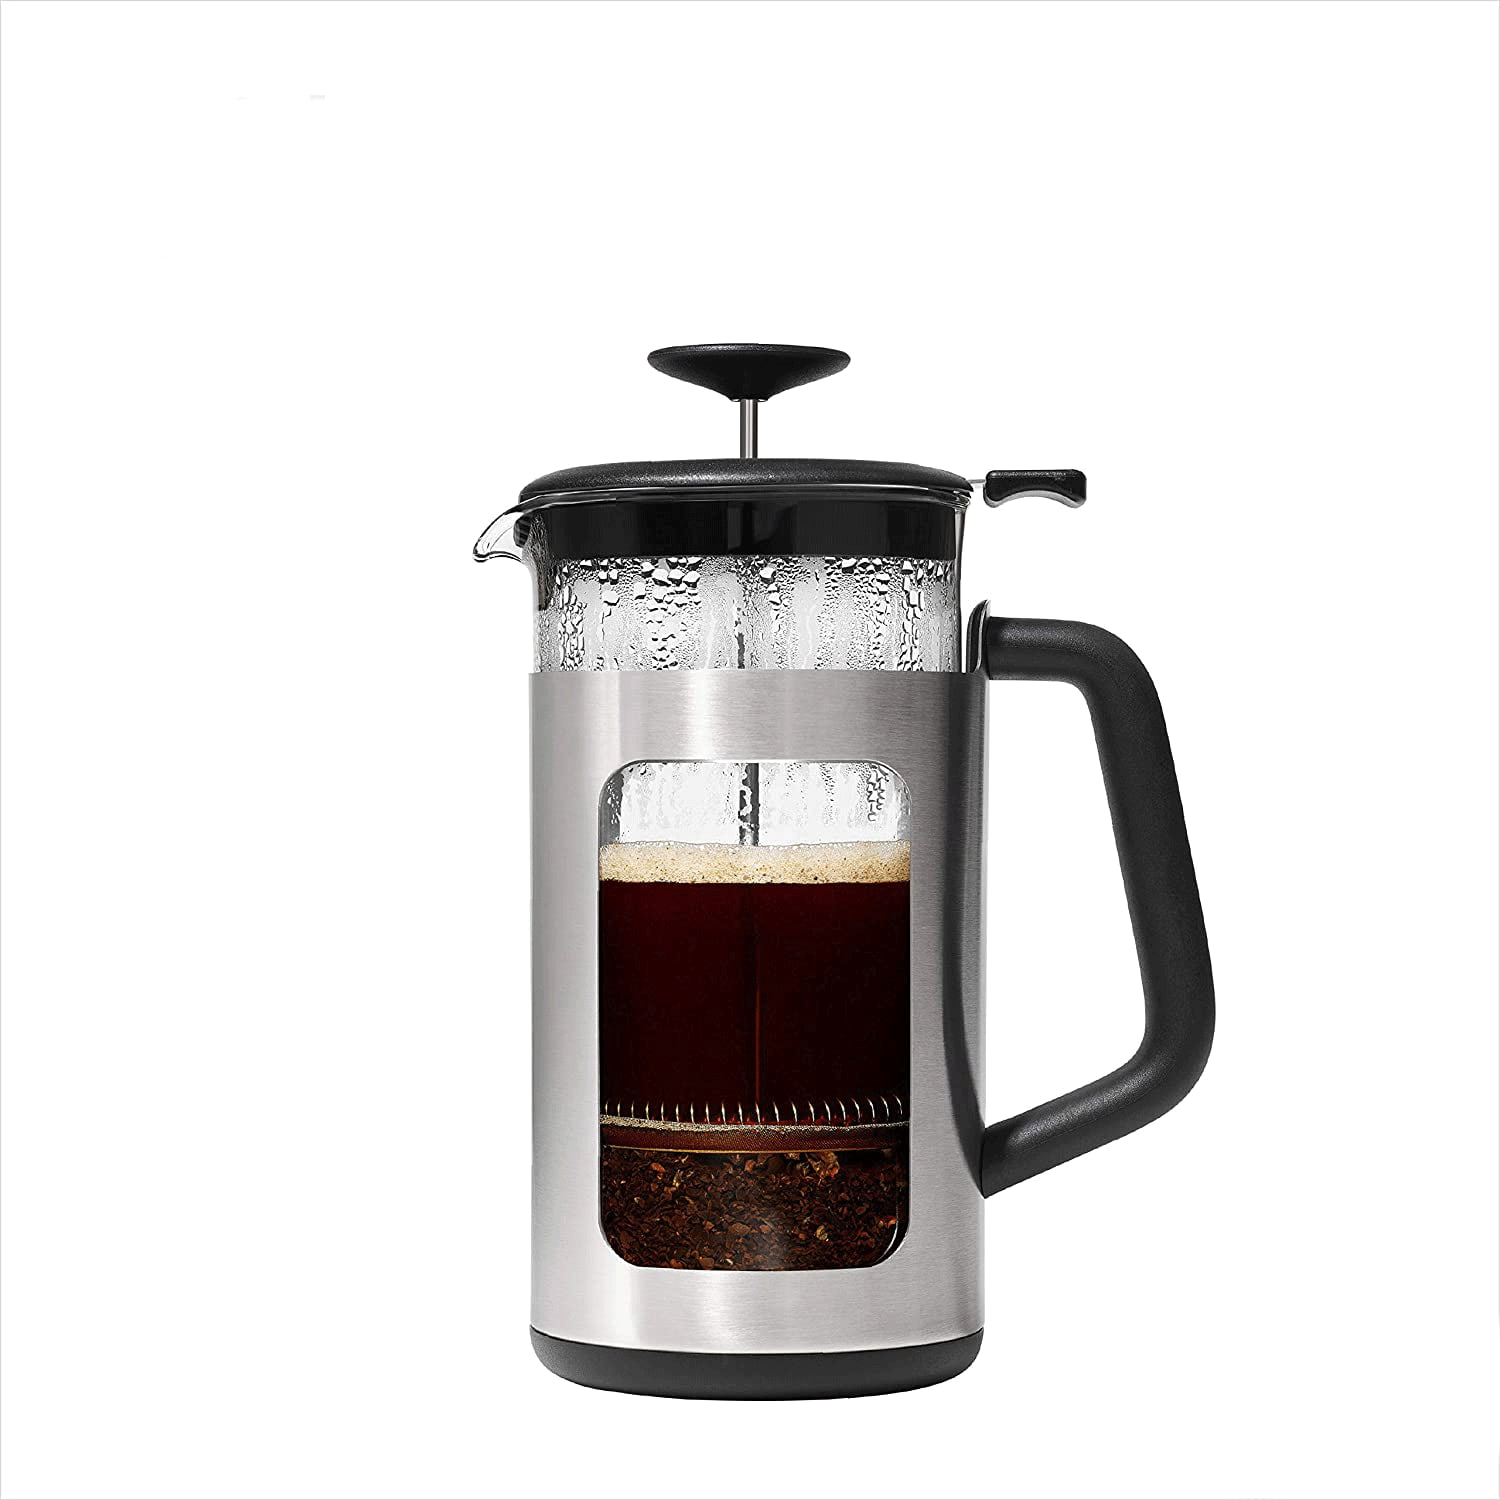 8 Cup,Silver/Black OXO 11108600 Brew Easy Clean French Press Coffee Maker 